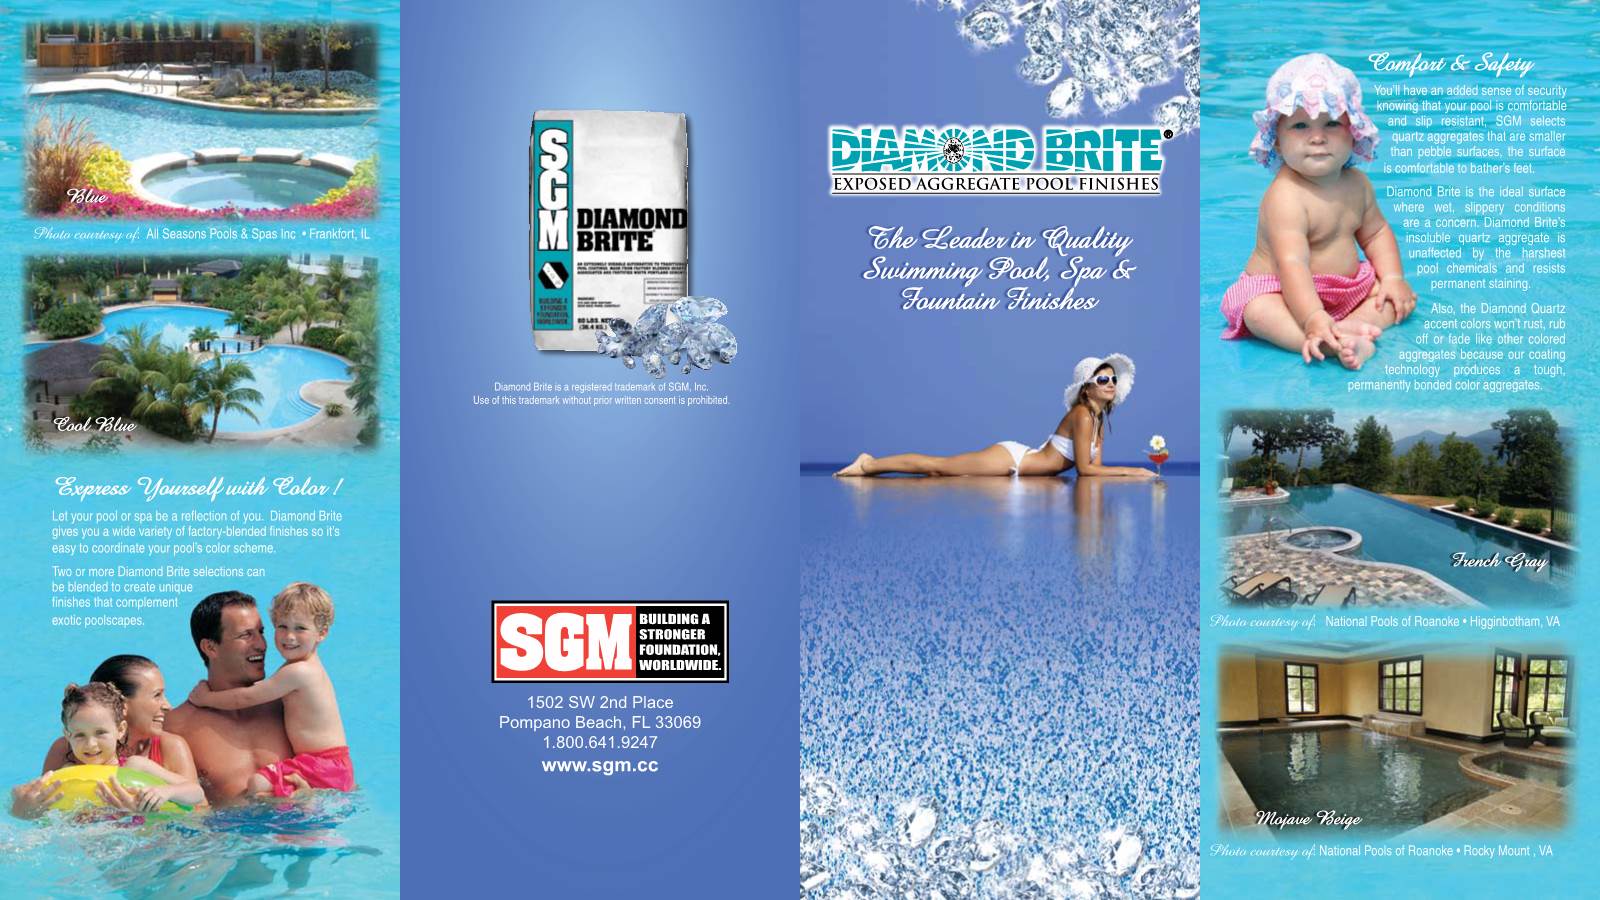 The Leader in Quality Swimming Pool, Spa & Fountain Finishes